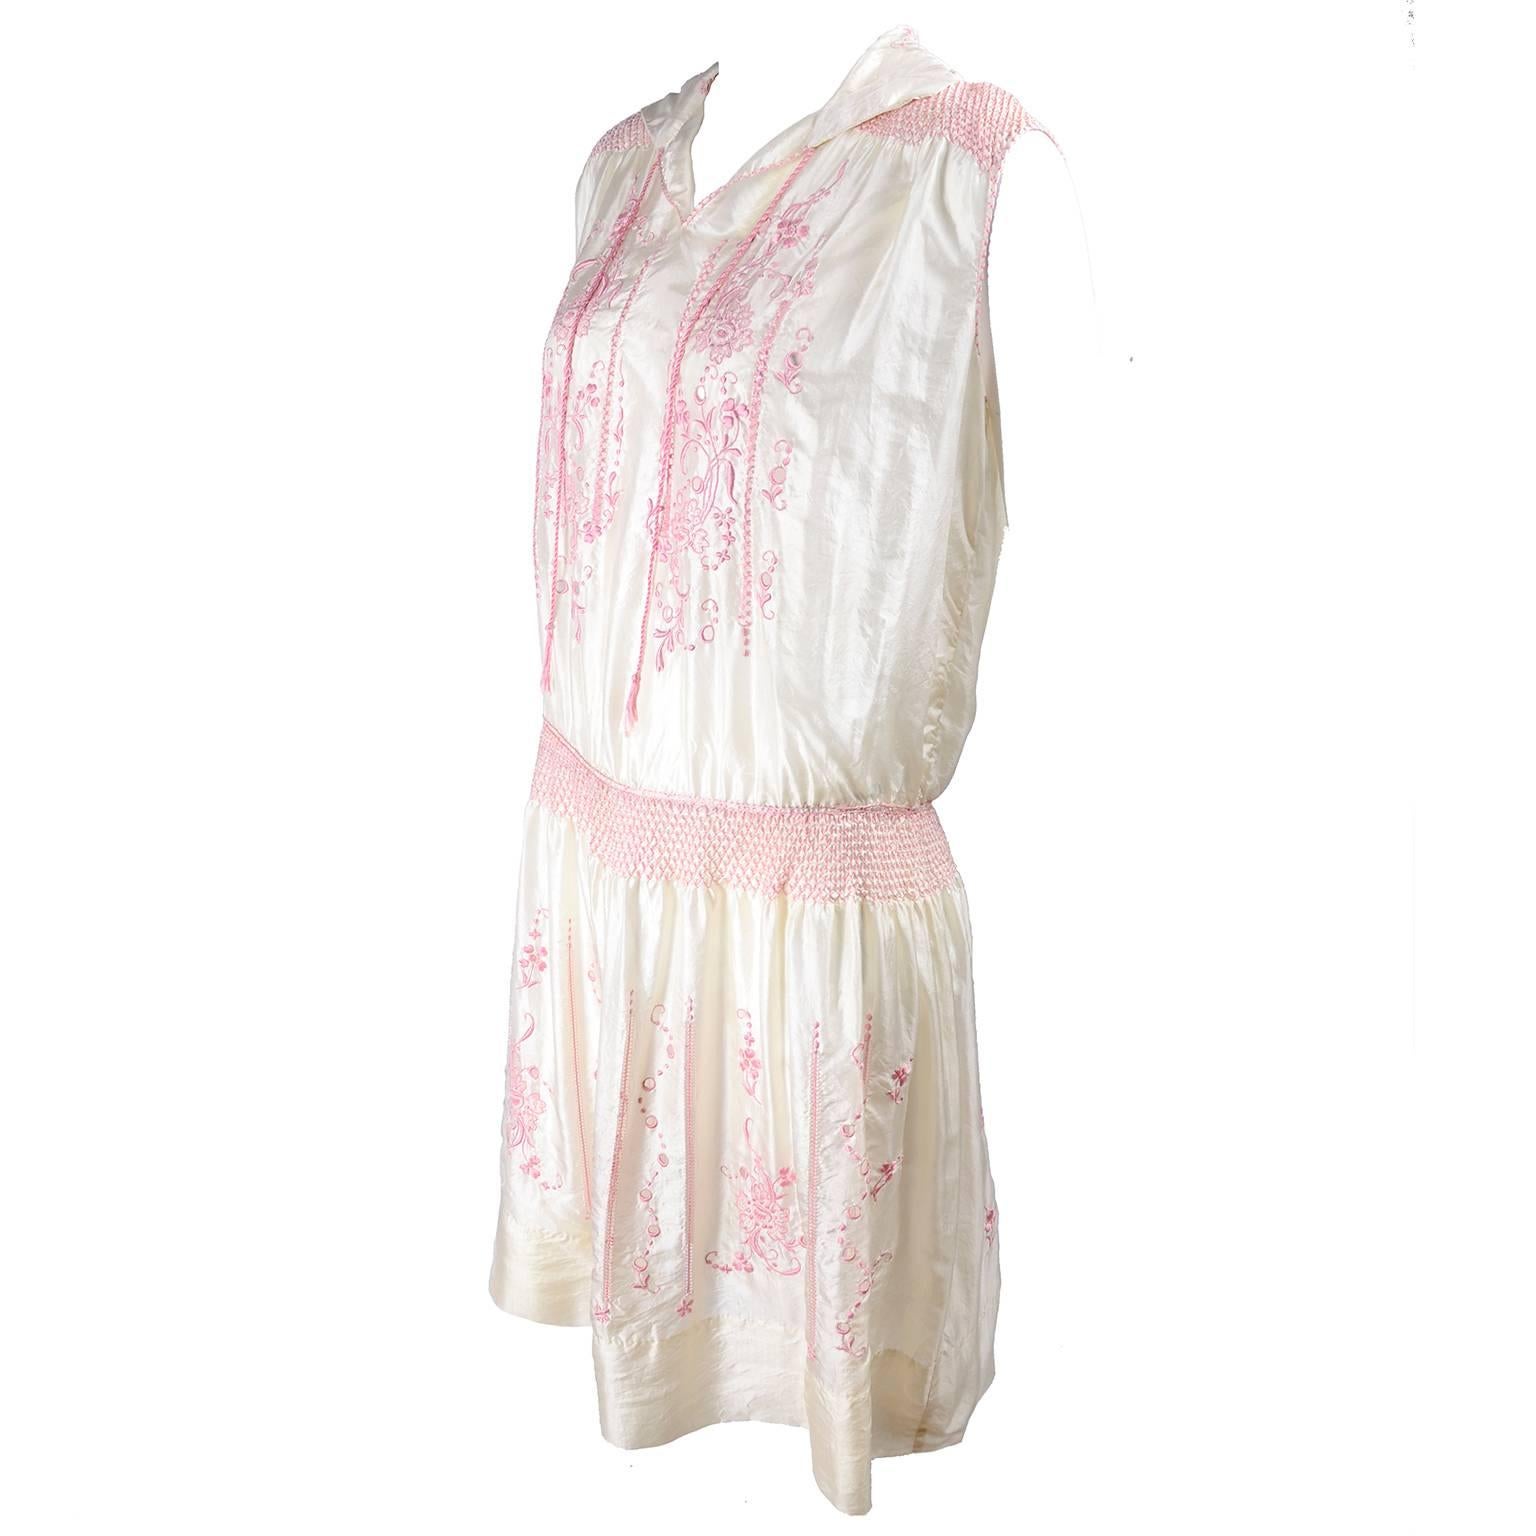 1920s Vintage Dress in Ivory Silk With Pink Embroidery and Topstitching